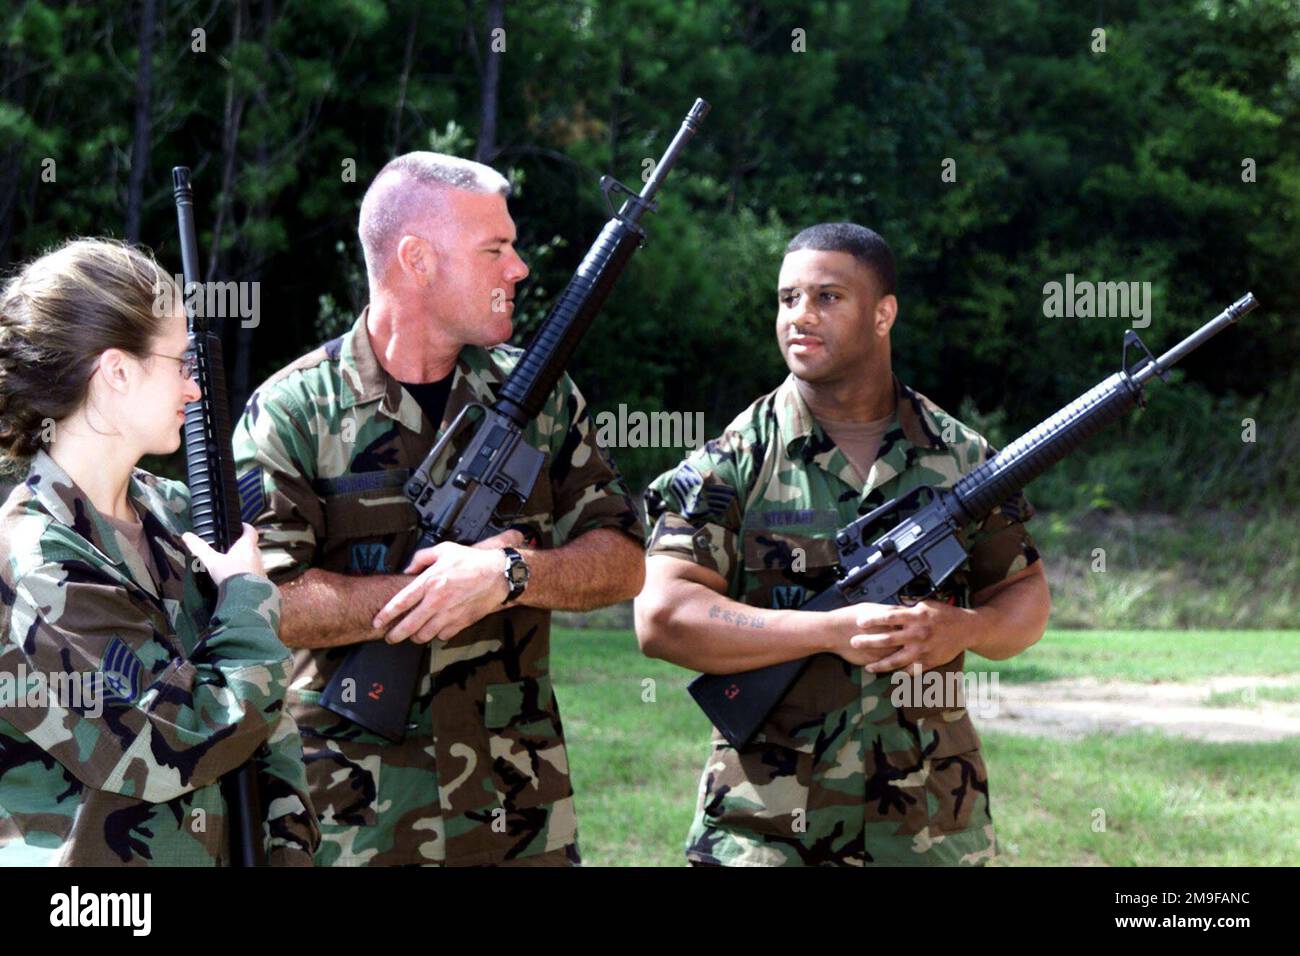 US Air Force Security Force members of the 245th Air Traffic Control Squadron (ATCS) stand ready after being issued their M-16s. The 245th ATCS is undergoing its first ORI. The squadron is a Geographically Separated Unit (GSU) located on McEntire Air National Guard Station, Eastover, South Carolina.(U.S. Air Force PHOTO by: SSG Gerold O. Gamble). Subject Operation/Series: 245TH AIR TRAFFIC CONTROL SQUADRON ORI Base: Mcentire Ang Station State: South Carolina (SC) Country: United States Of America (USA) Stock Photo